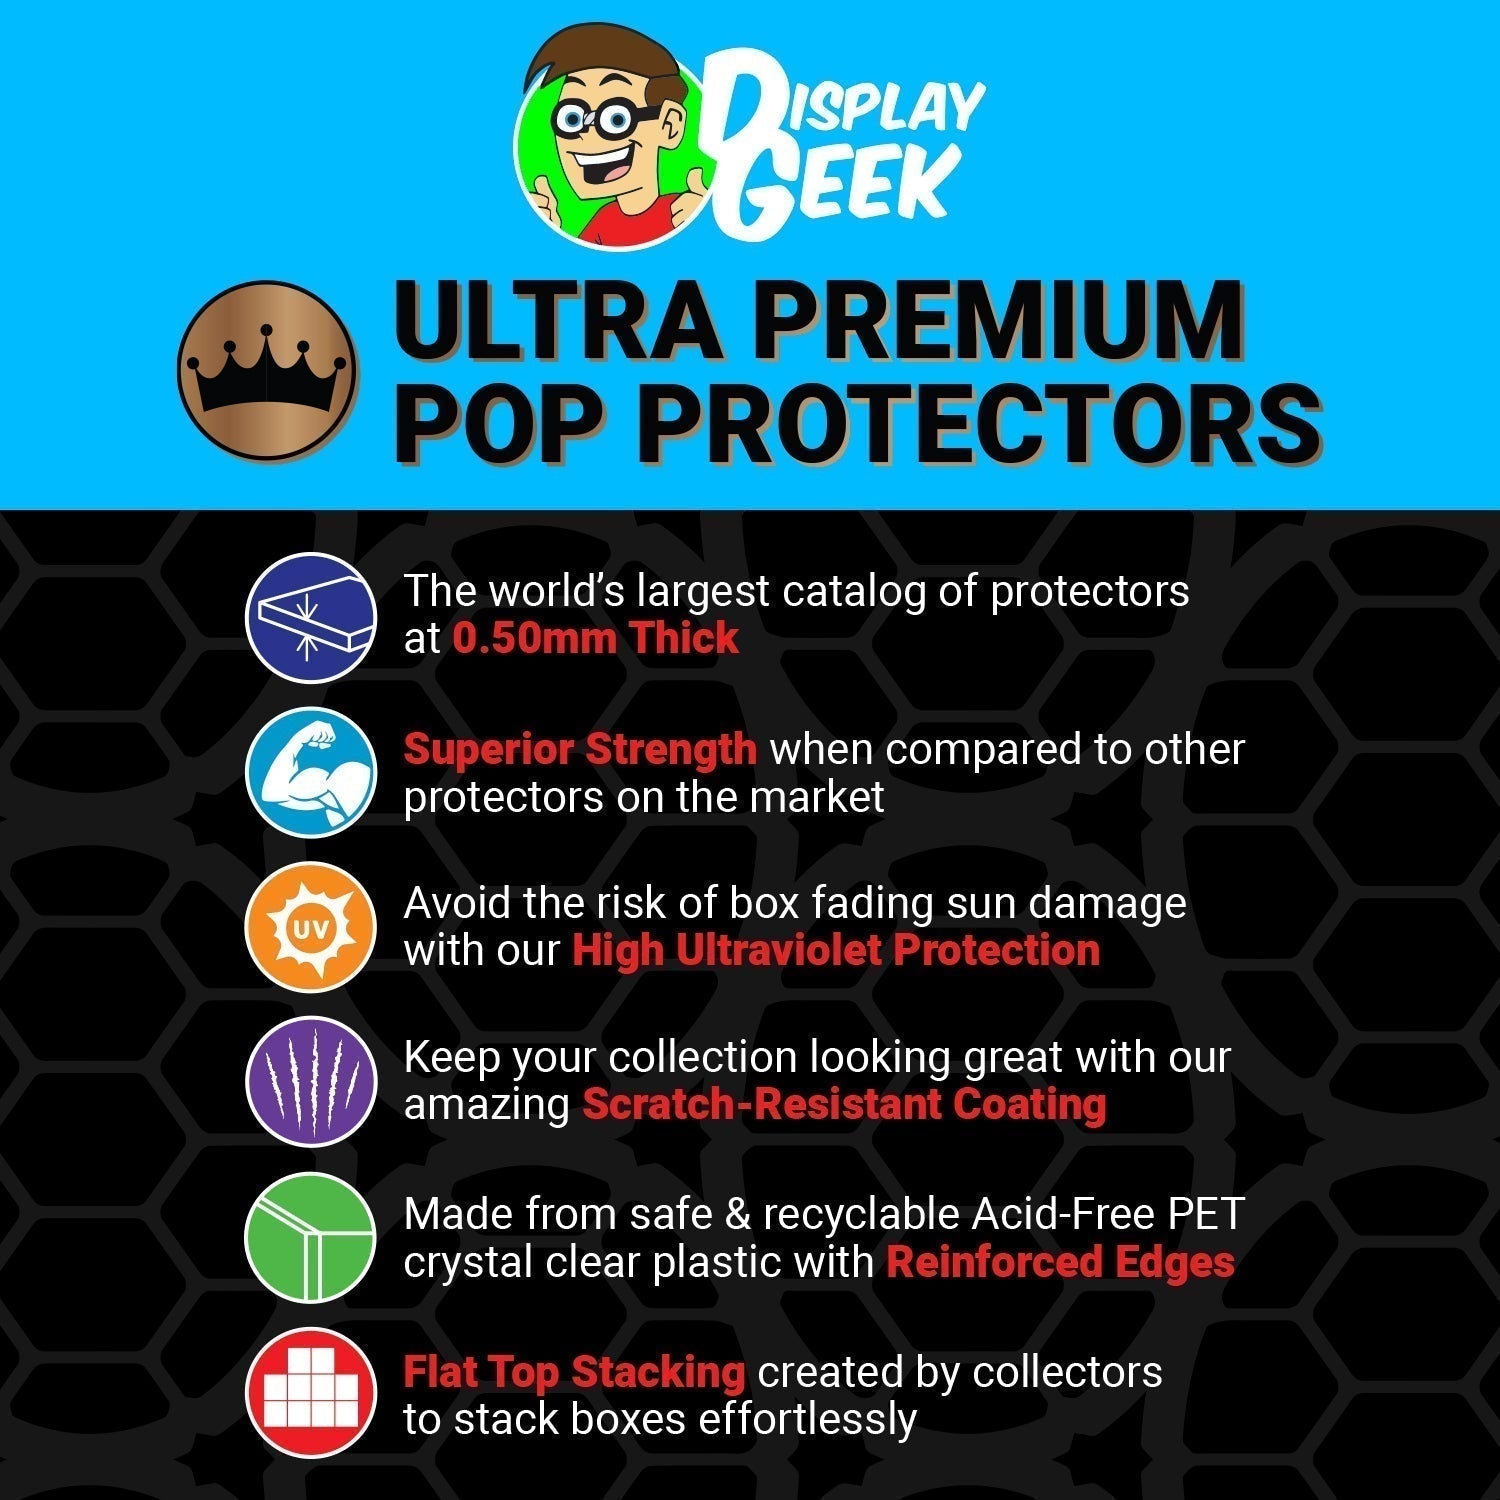 Pop Protector for Elvis Christmas Album #57 Funko Pop Albums - PPG Pop Protector Guide Search Created by Display Geek